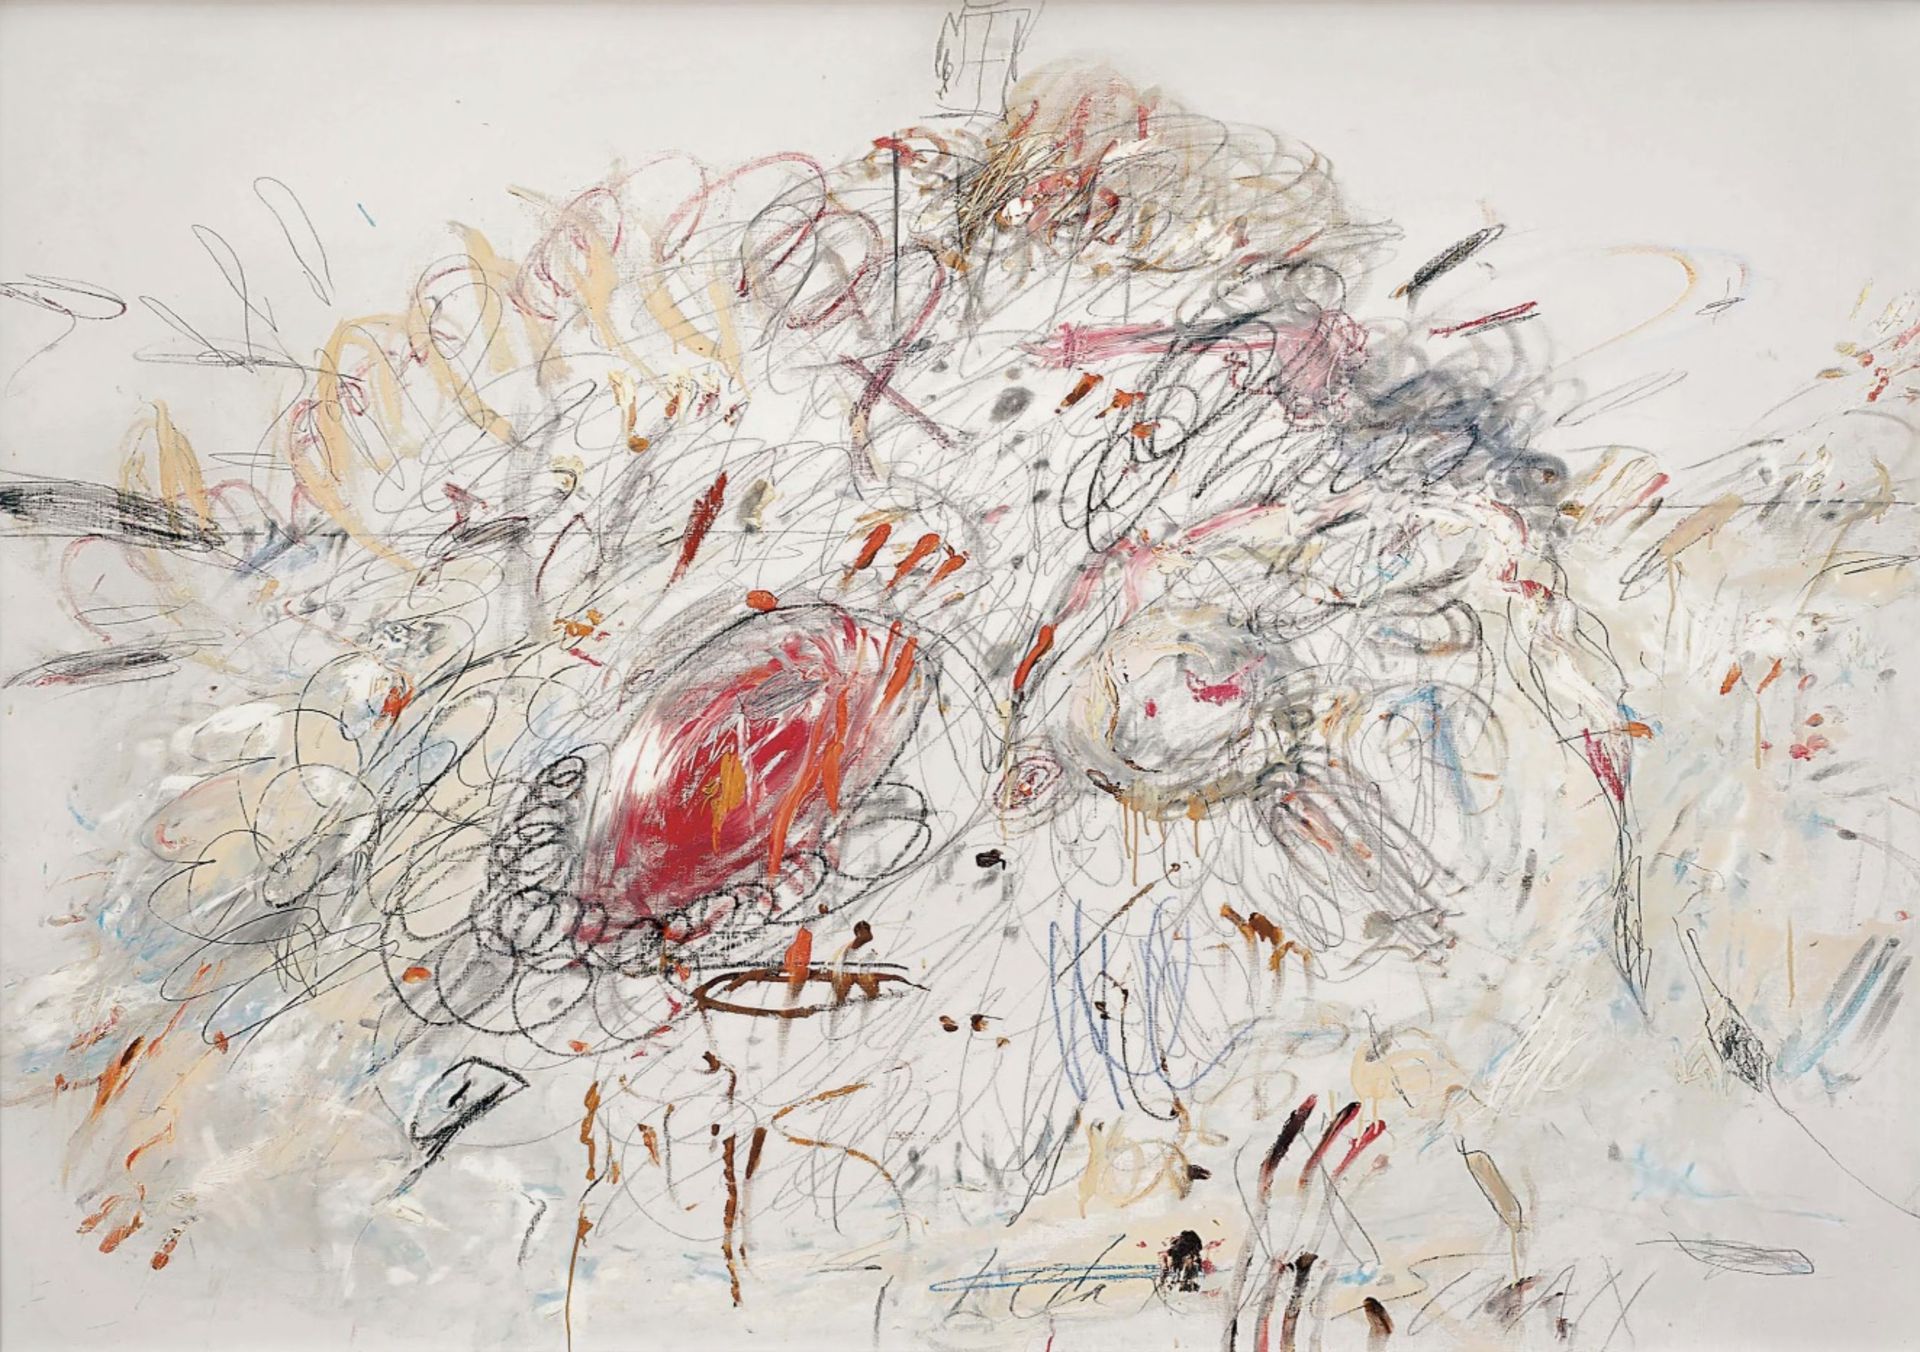 Cy Twombly "Untitled" Print